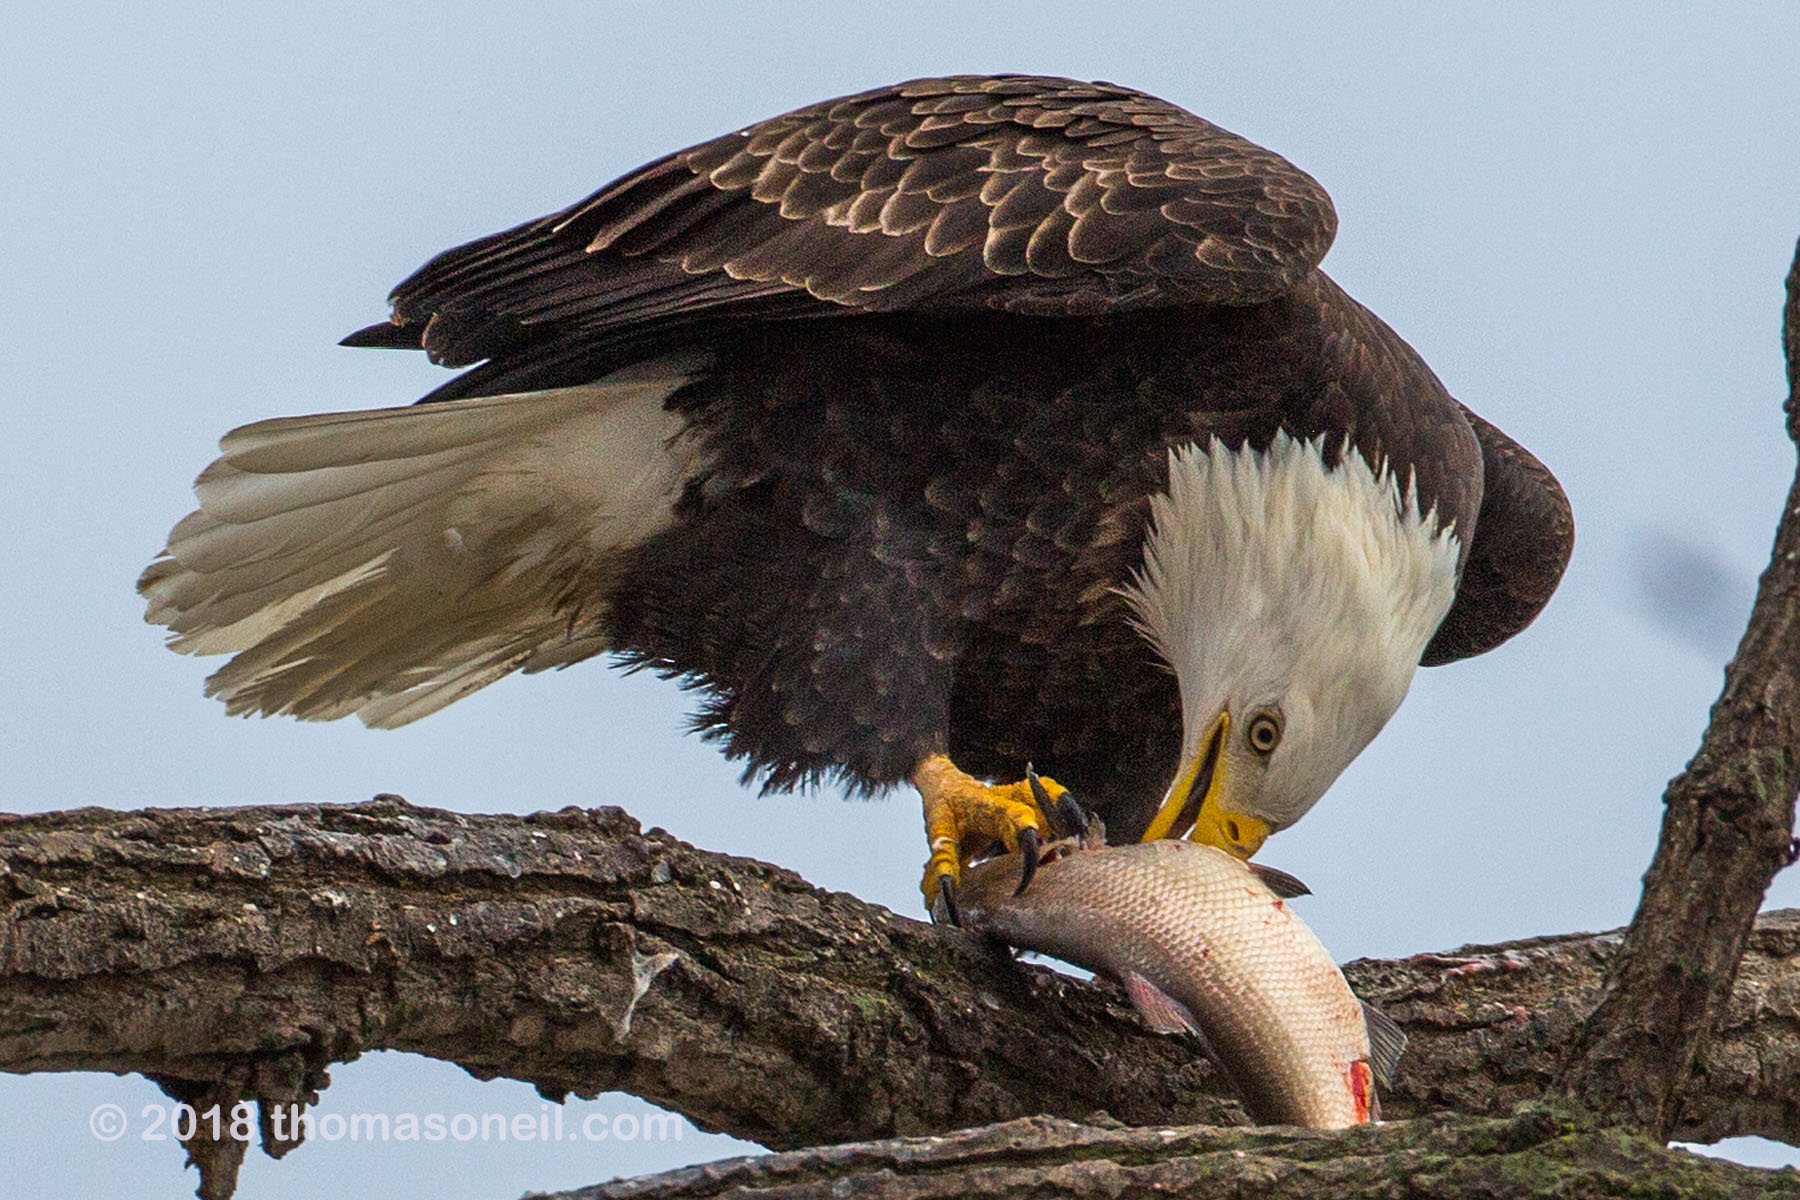 Bald eagle eating fish, 6 of 7 in sequence, Keokuk, Iowa.  Click for next photo.